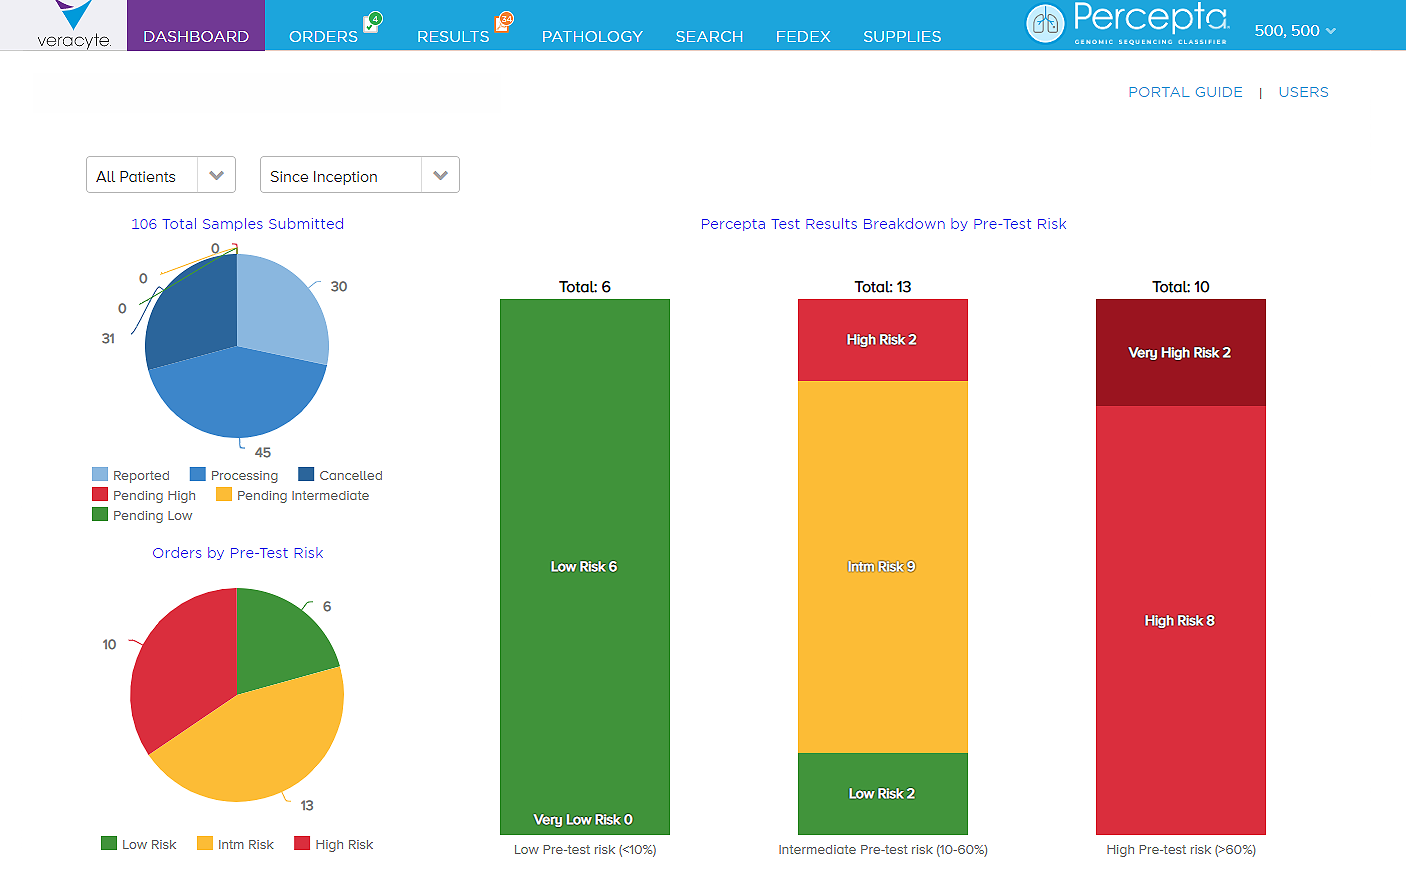 Screenshot of the Veracyte Portal Percepta GSC Dashboard, showing the results breakdown for all patients since inception.